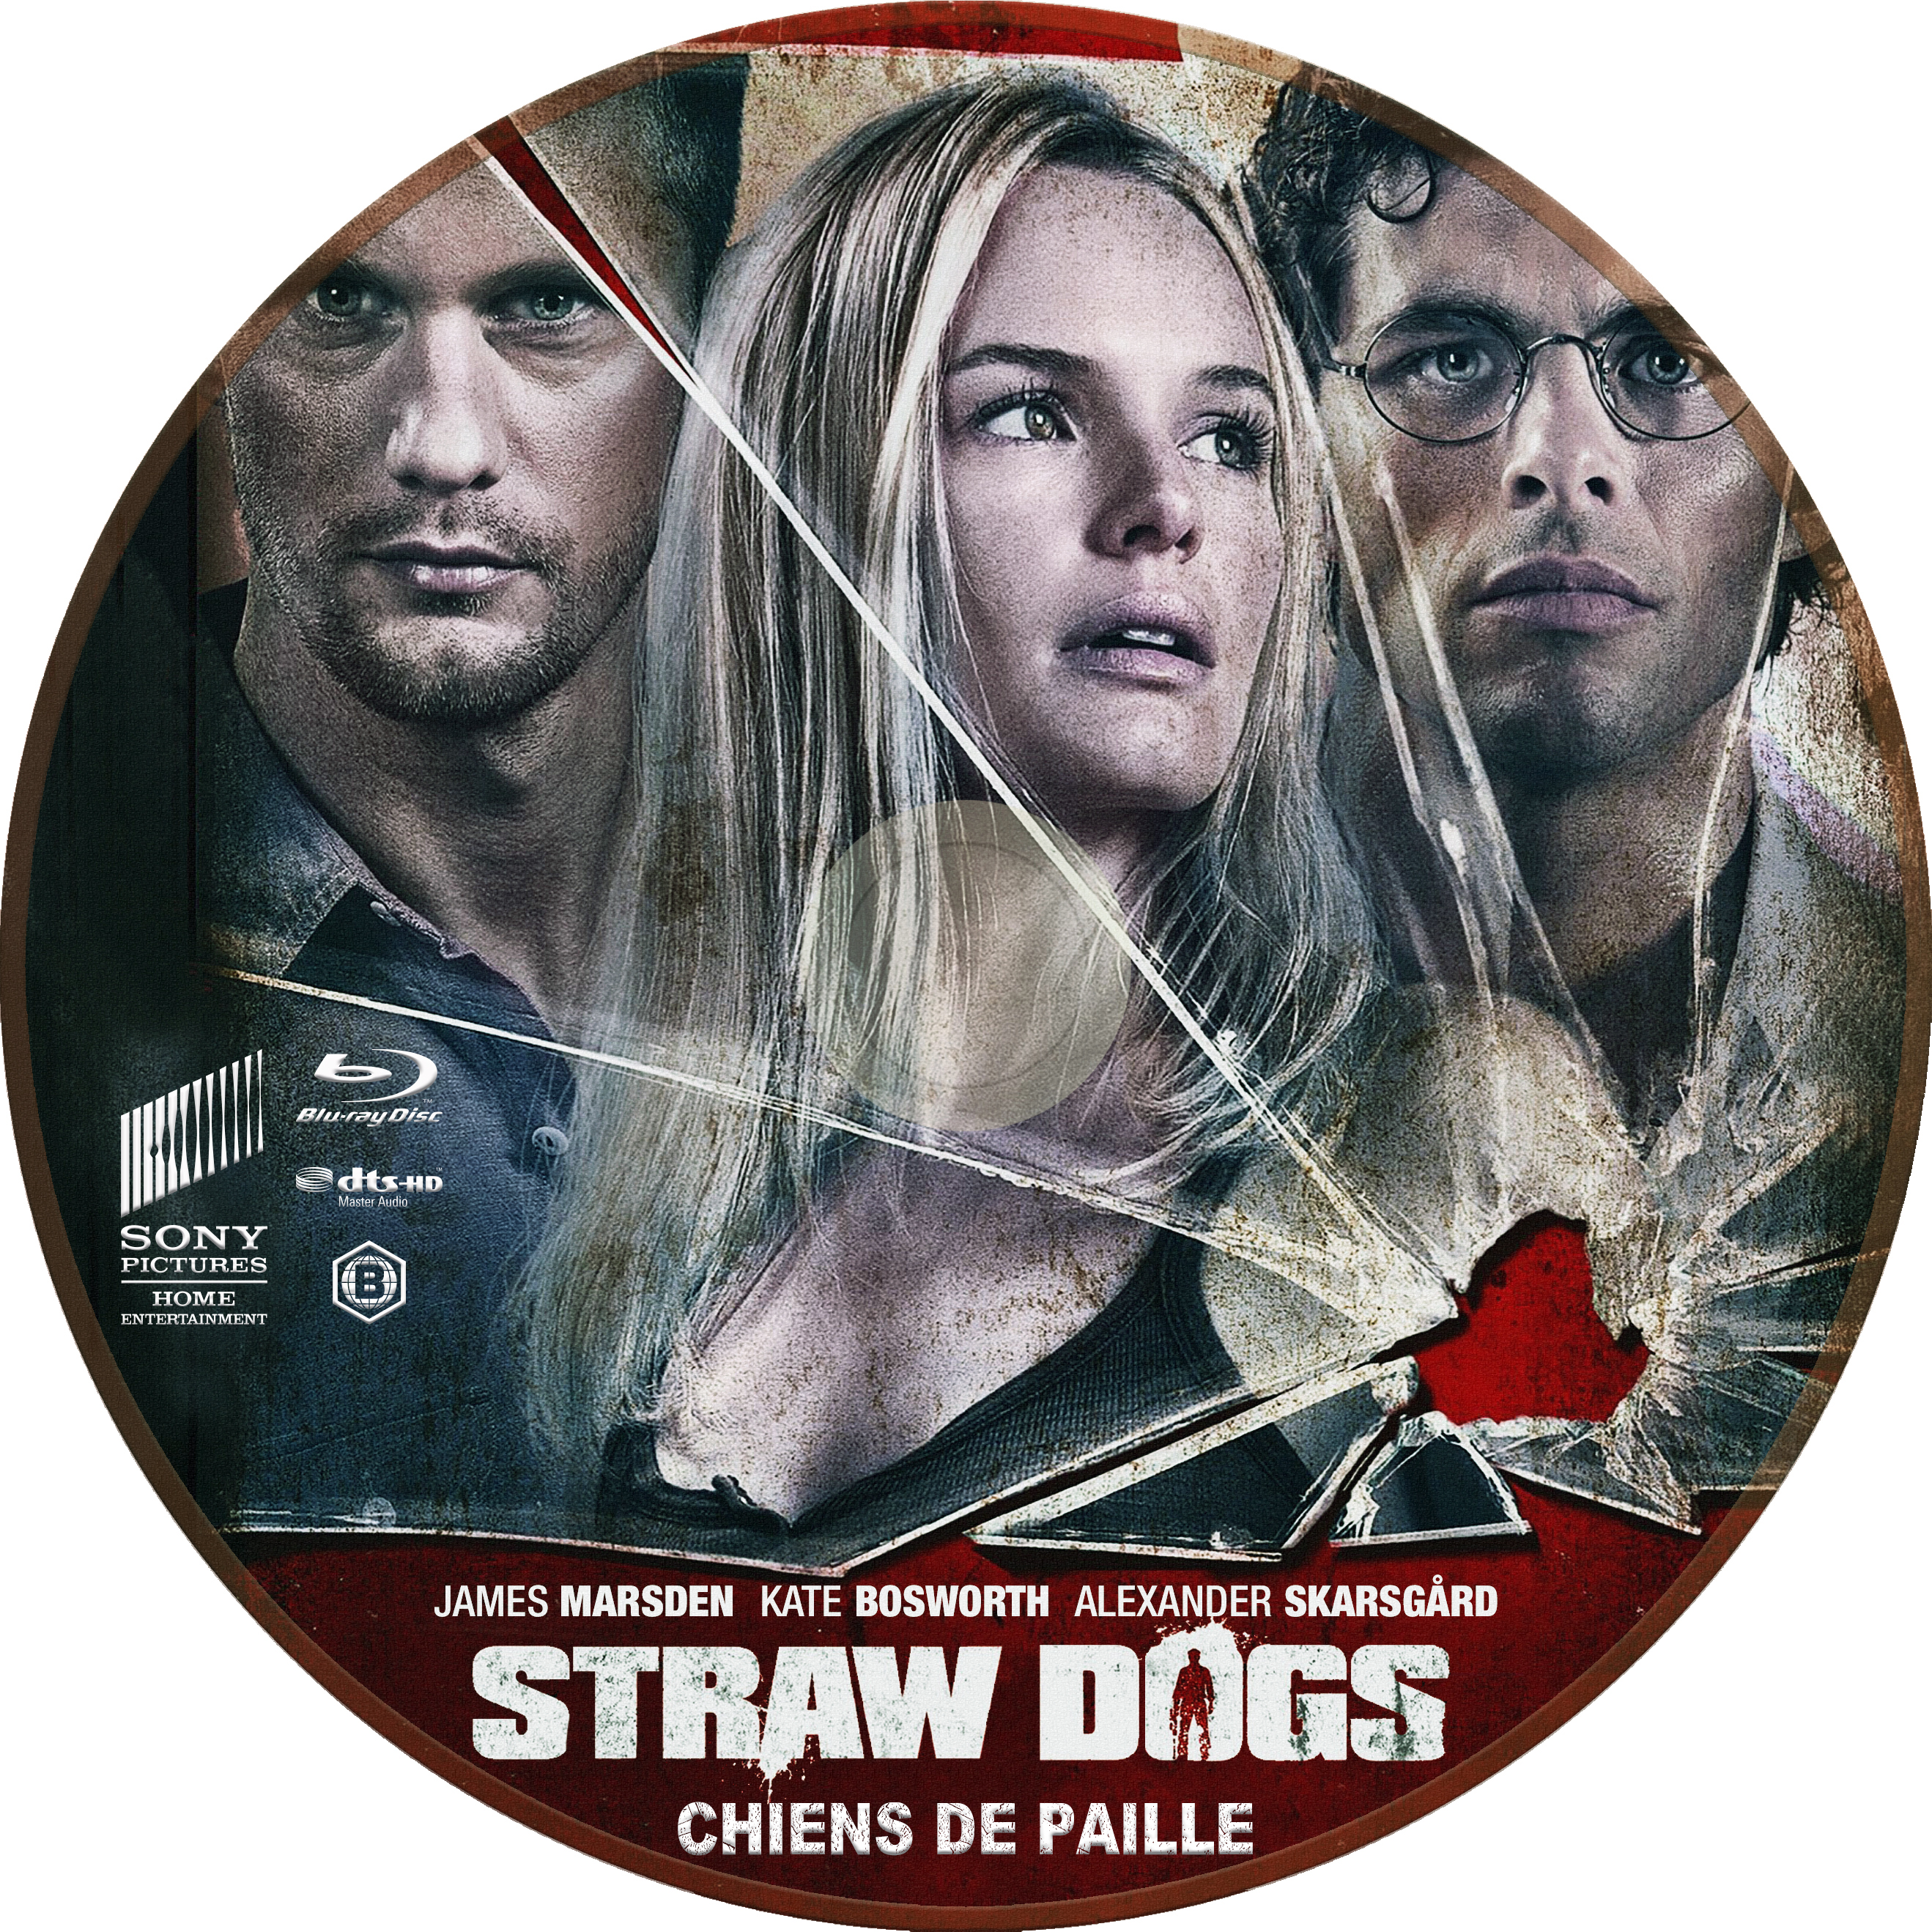 Straw dogs - Les chiens de paille custom (BLU-RAY)